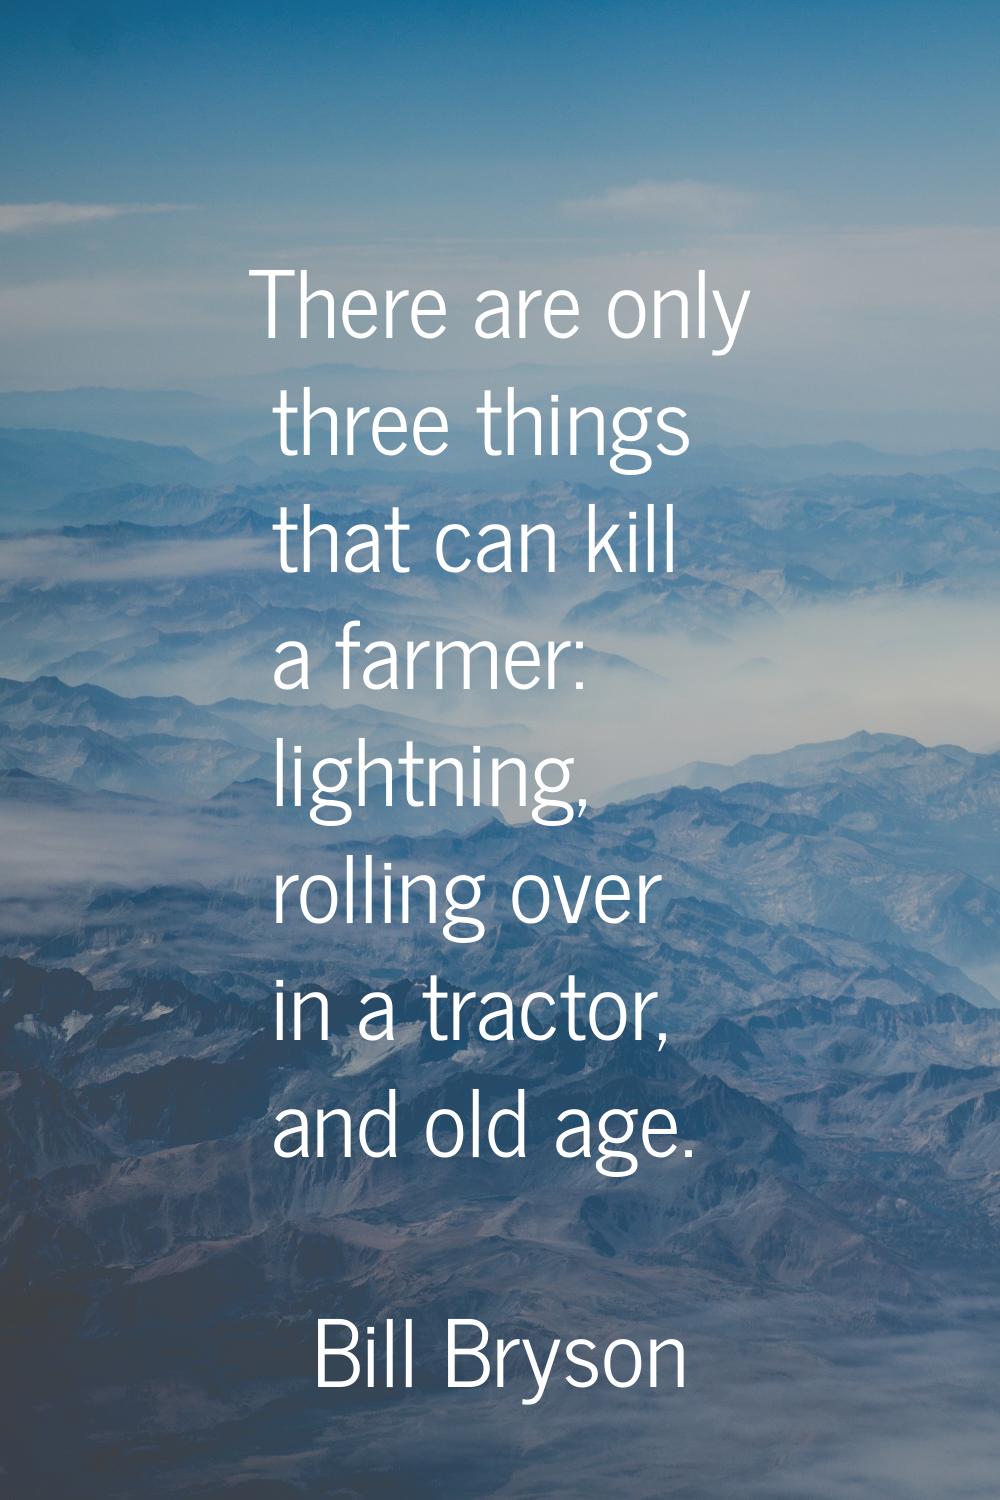 There are only three things that can kill a farmer: lightning, rolling over in a tractor, and old a